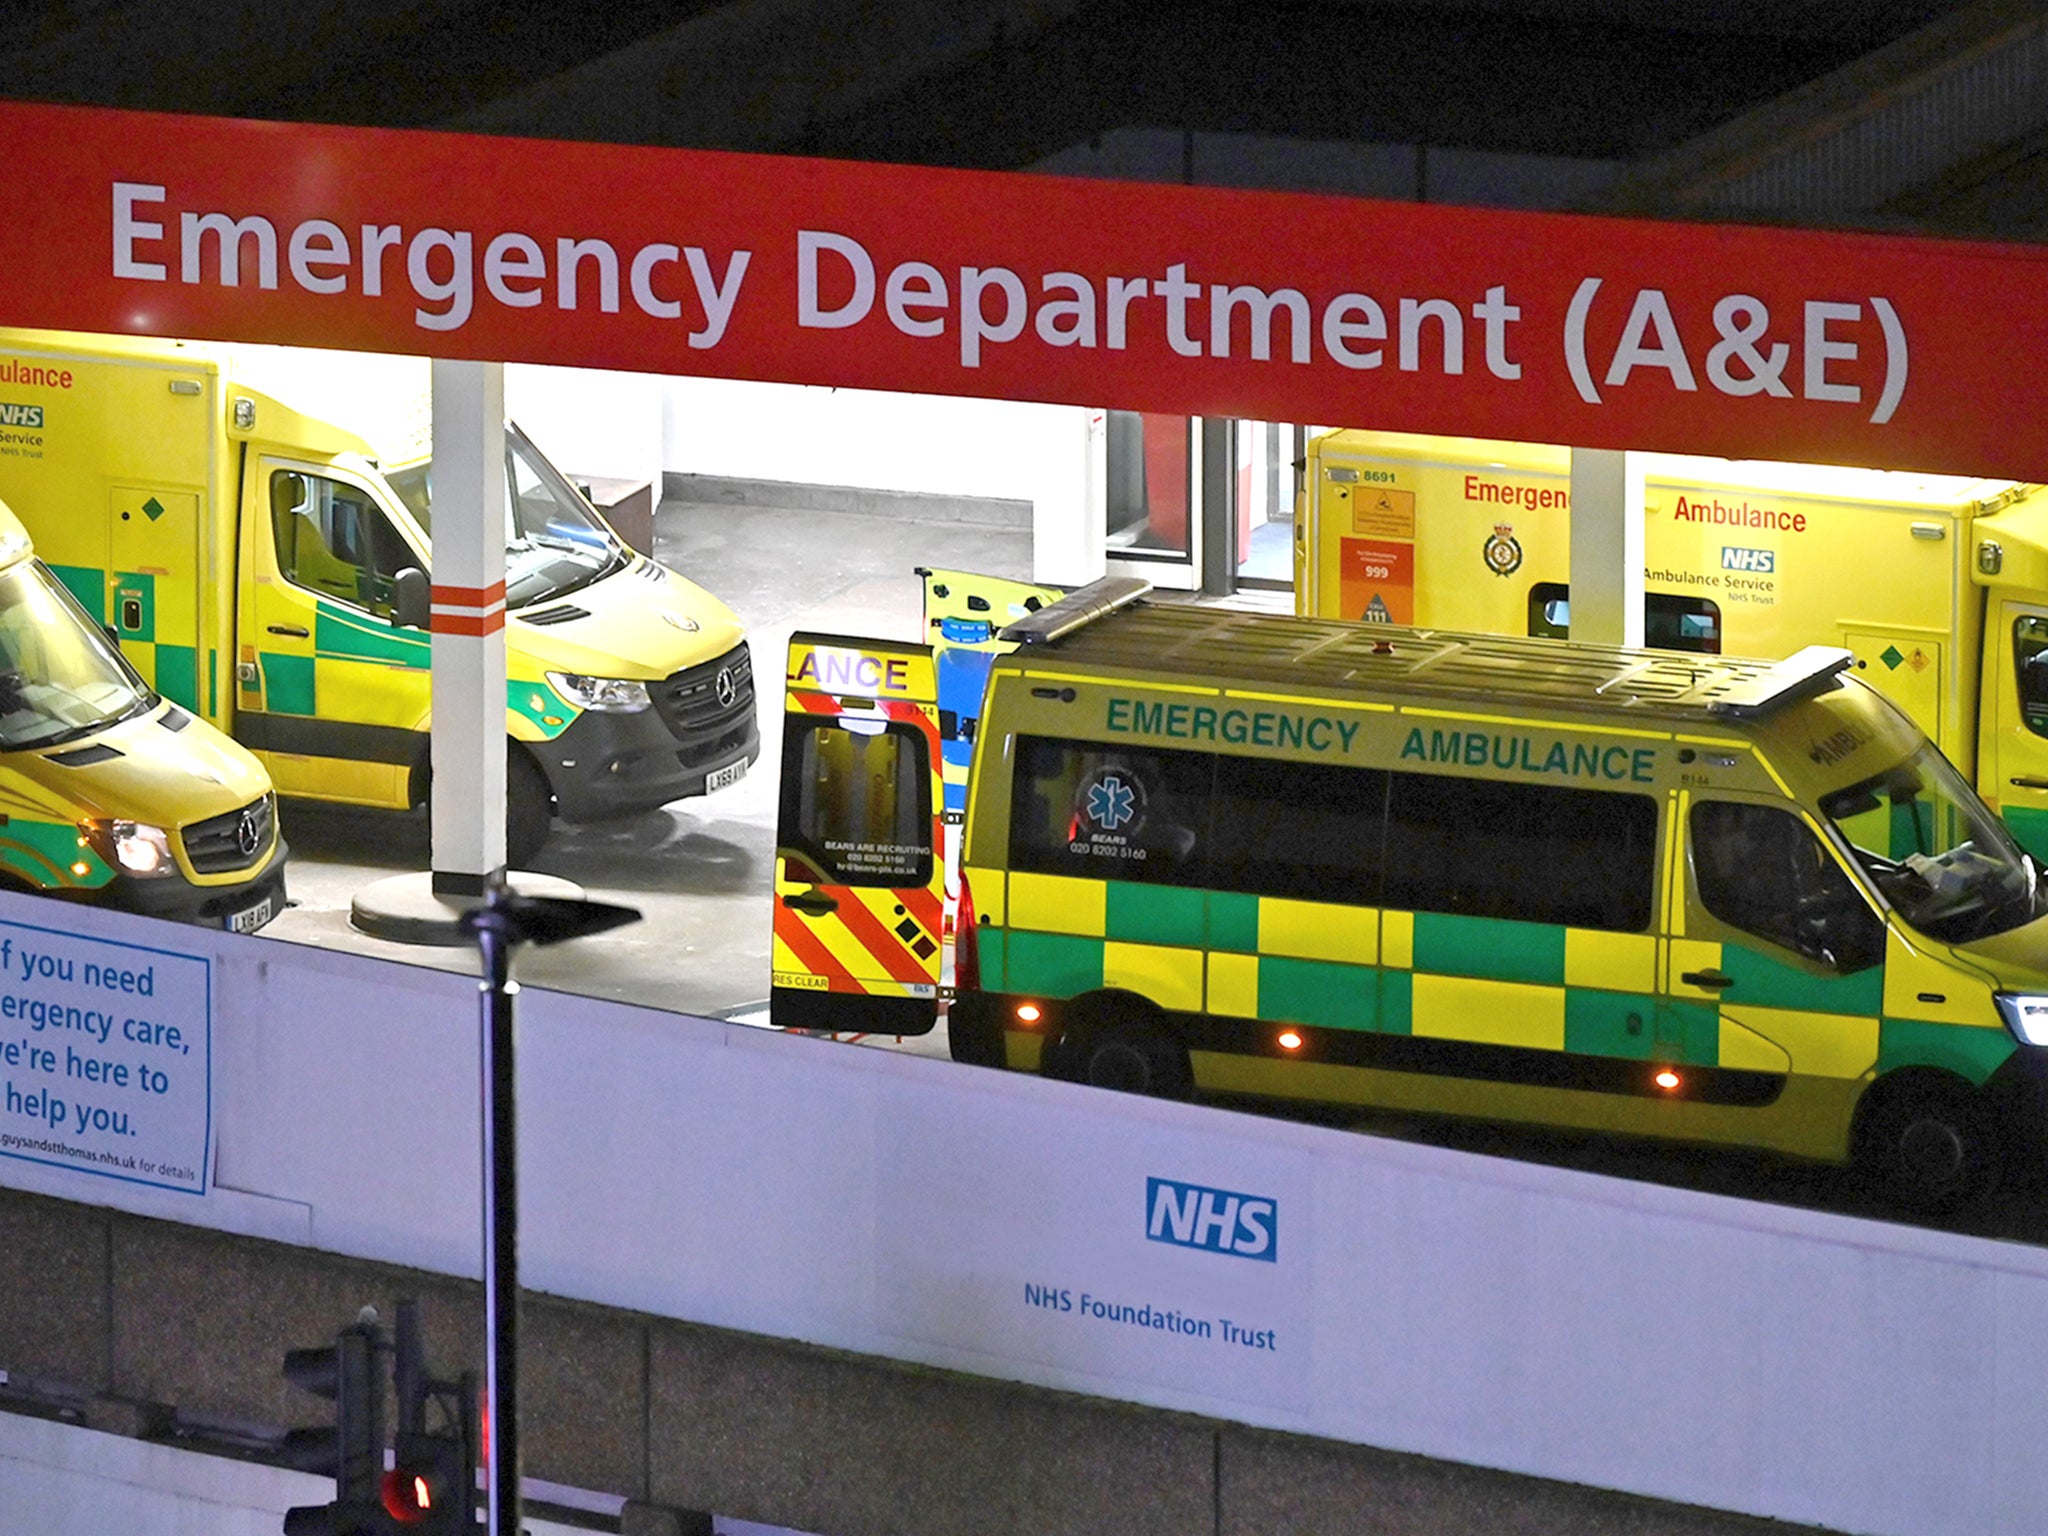 Some mental health patients are waiting ‘days’ and even ‘weeks’ in A&E, a consultant psychiatrist warned